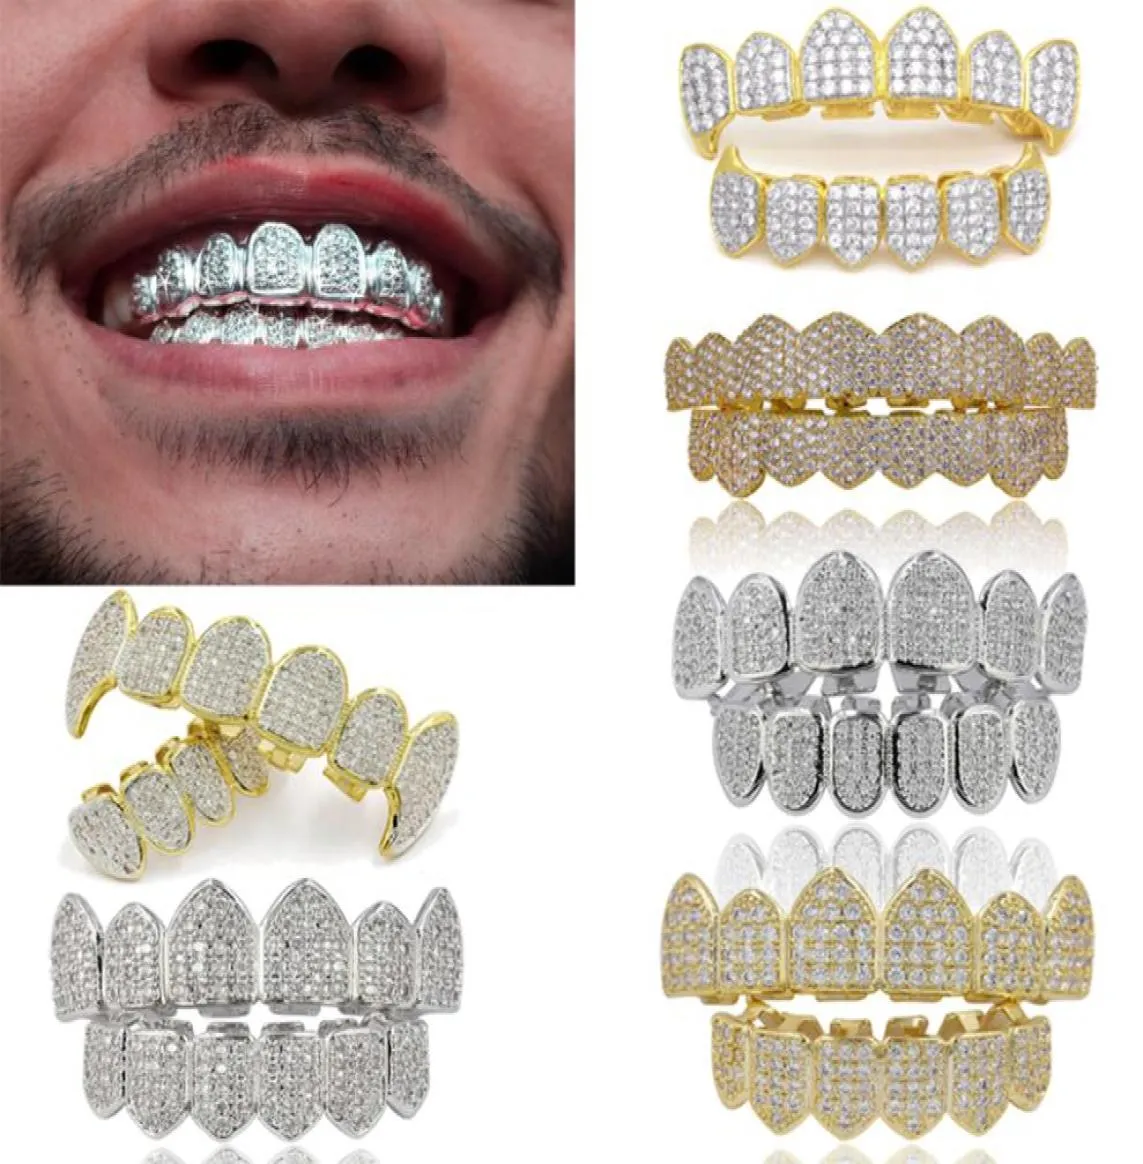 18K Real Gold Punk Hiphop Dental Mouth Grillz Braces Bling Cubic Zircon Rock Vampire Teeth Fang Grills Braces Tooth Cap Rapper Jew3845391